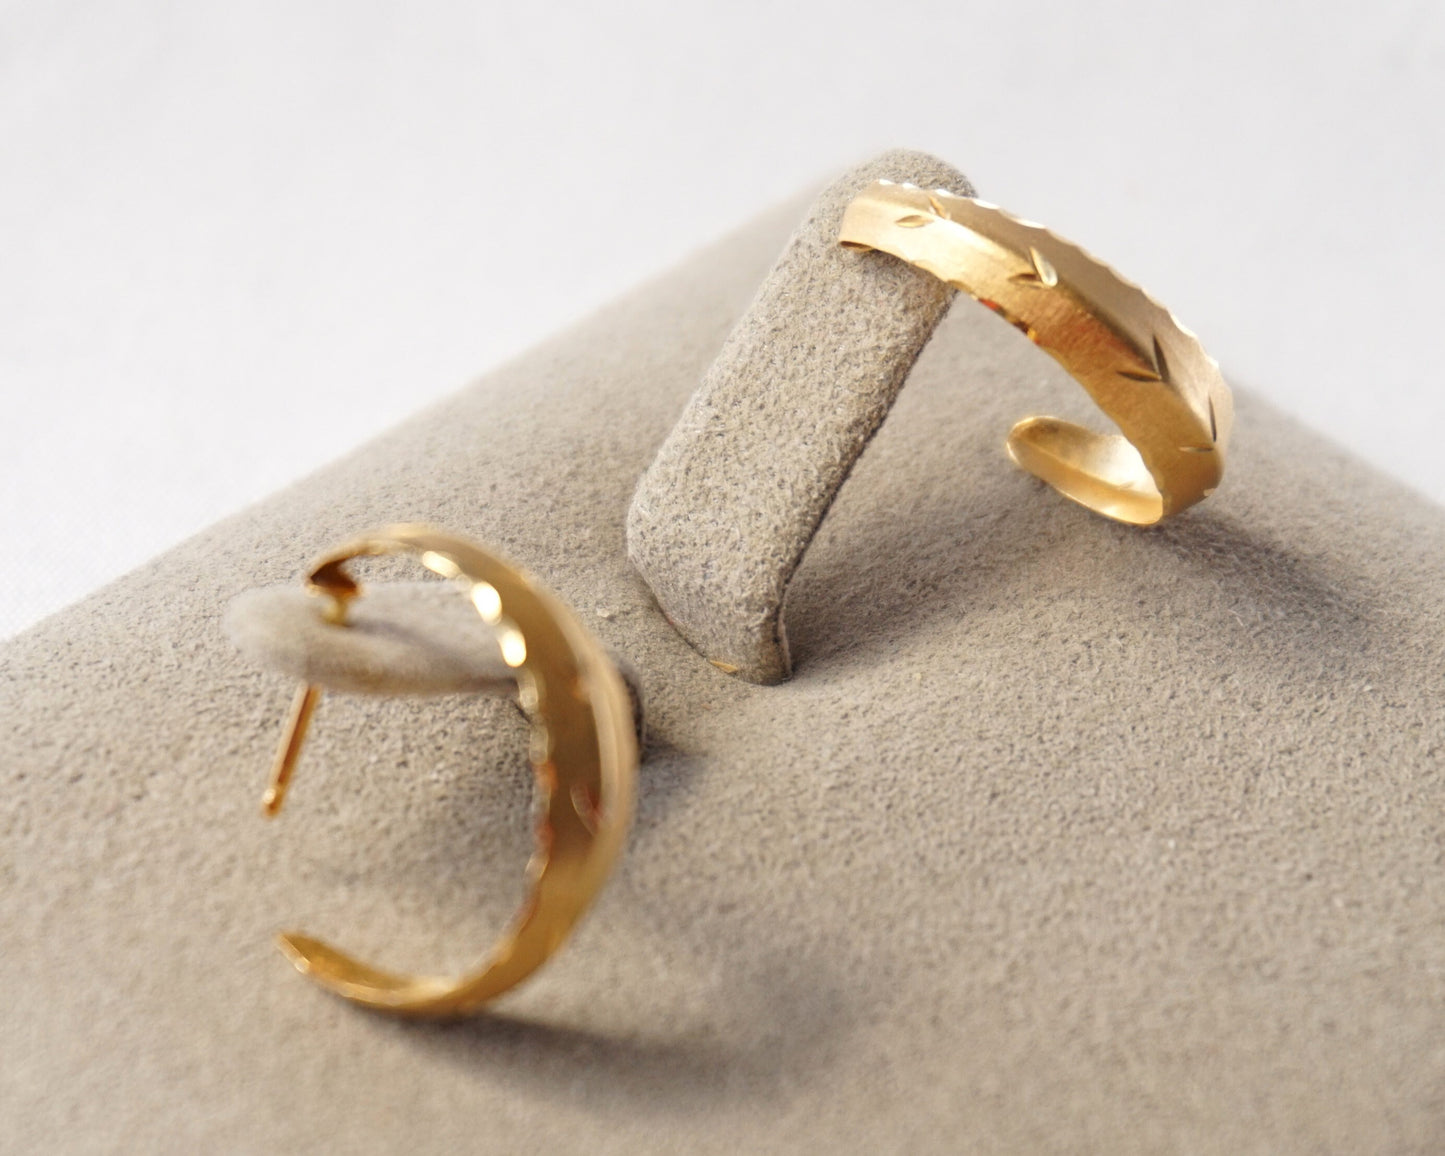 Unique Vintage 14K Gold CARLA Dainty Crescent Scalloped Hoops, Estate Everyday Textured Hoops